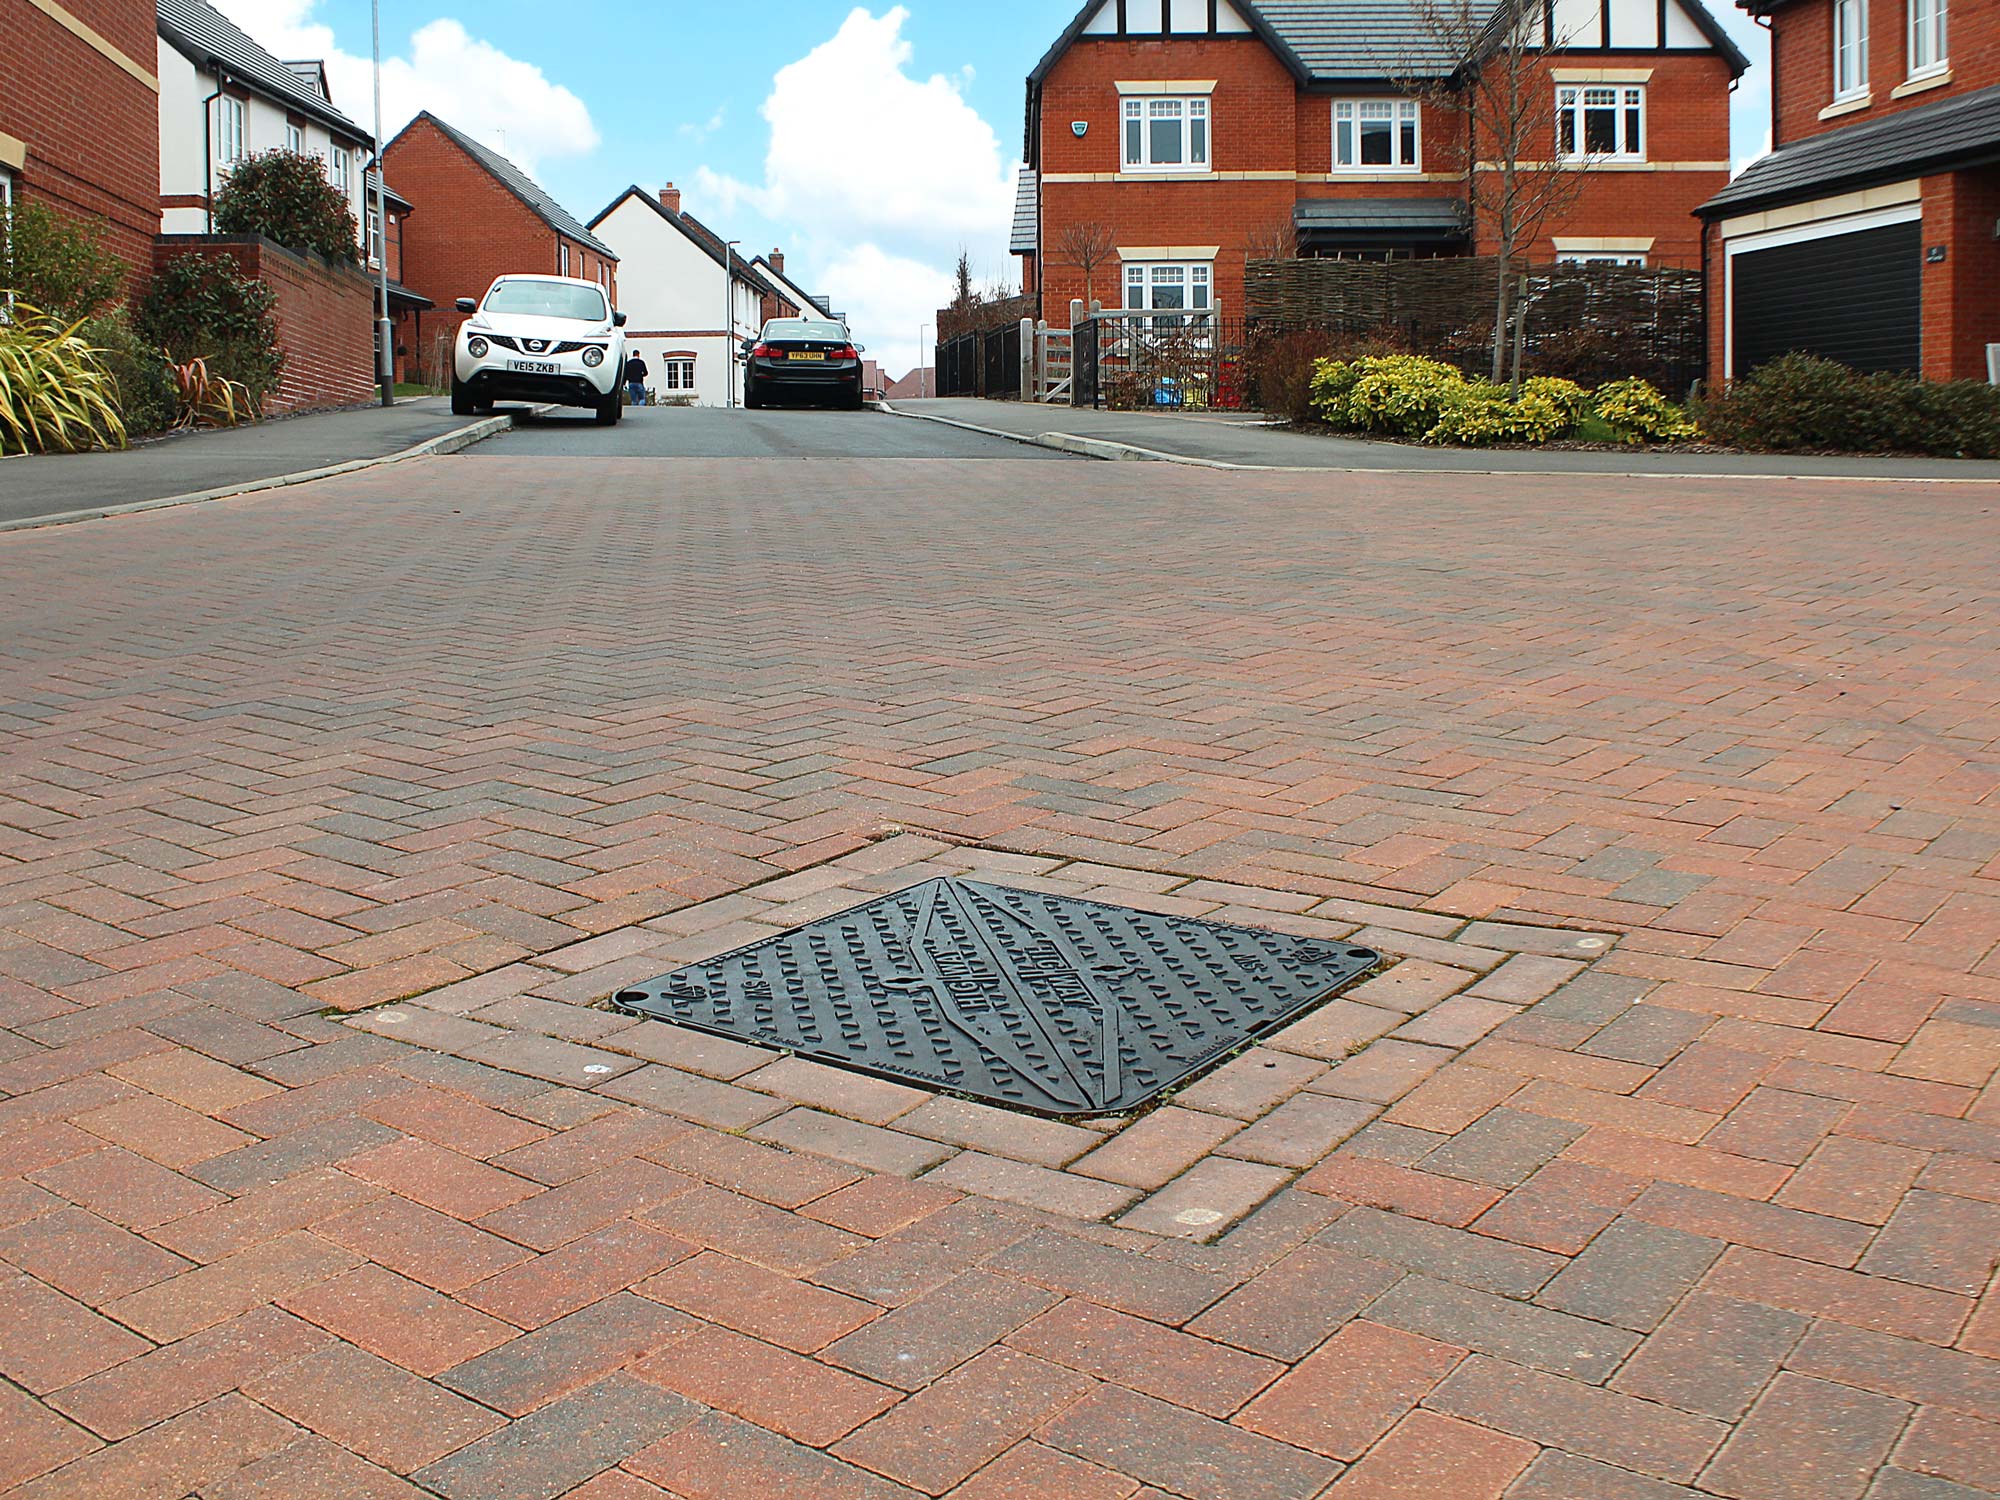 Highway manhole cover installed in road on newbuild housing estate